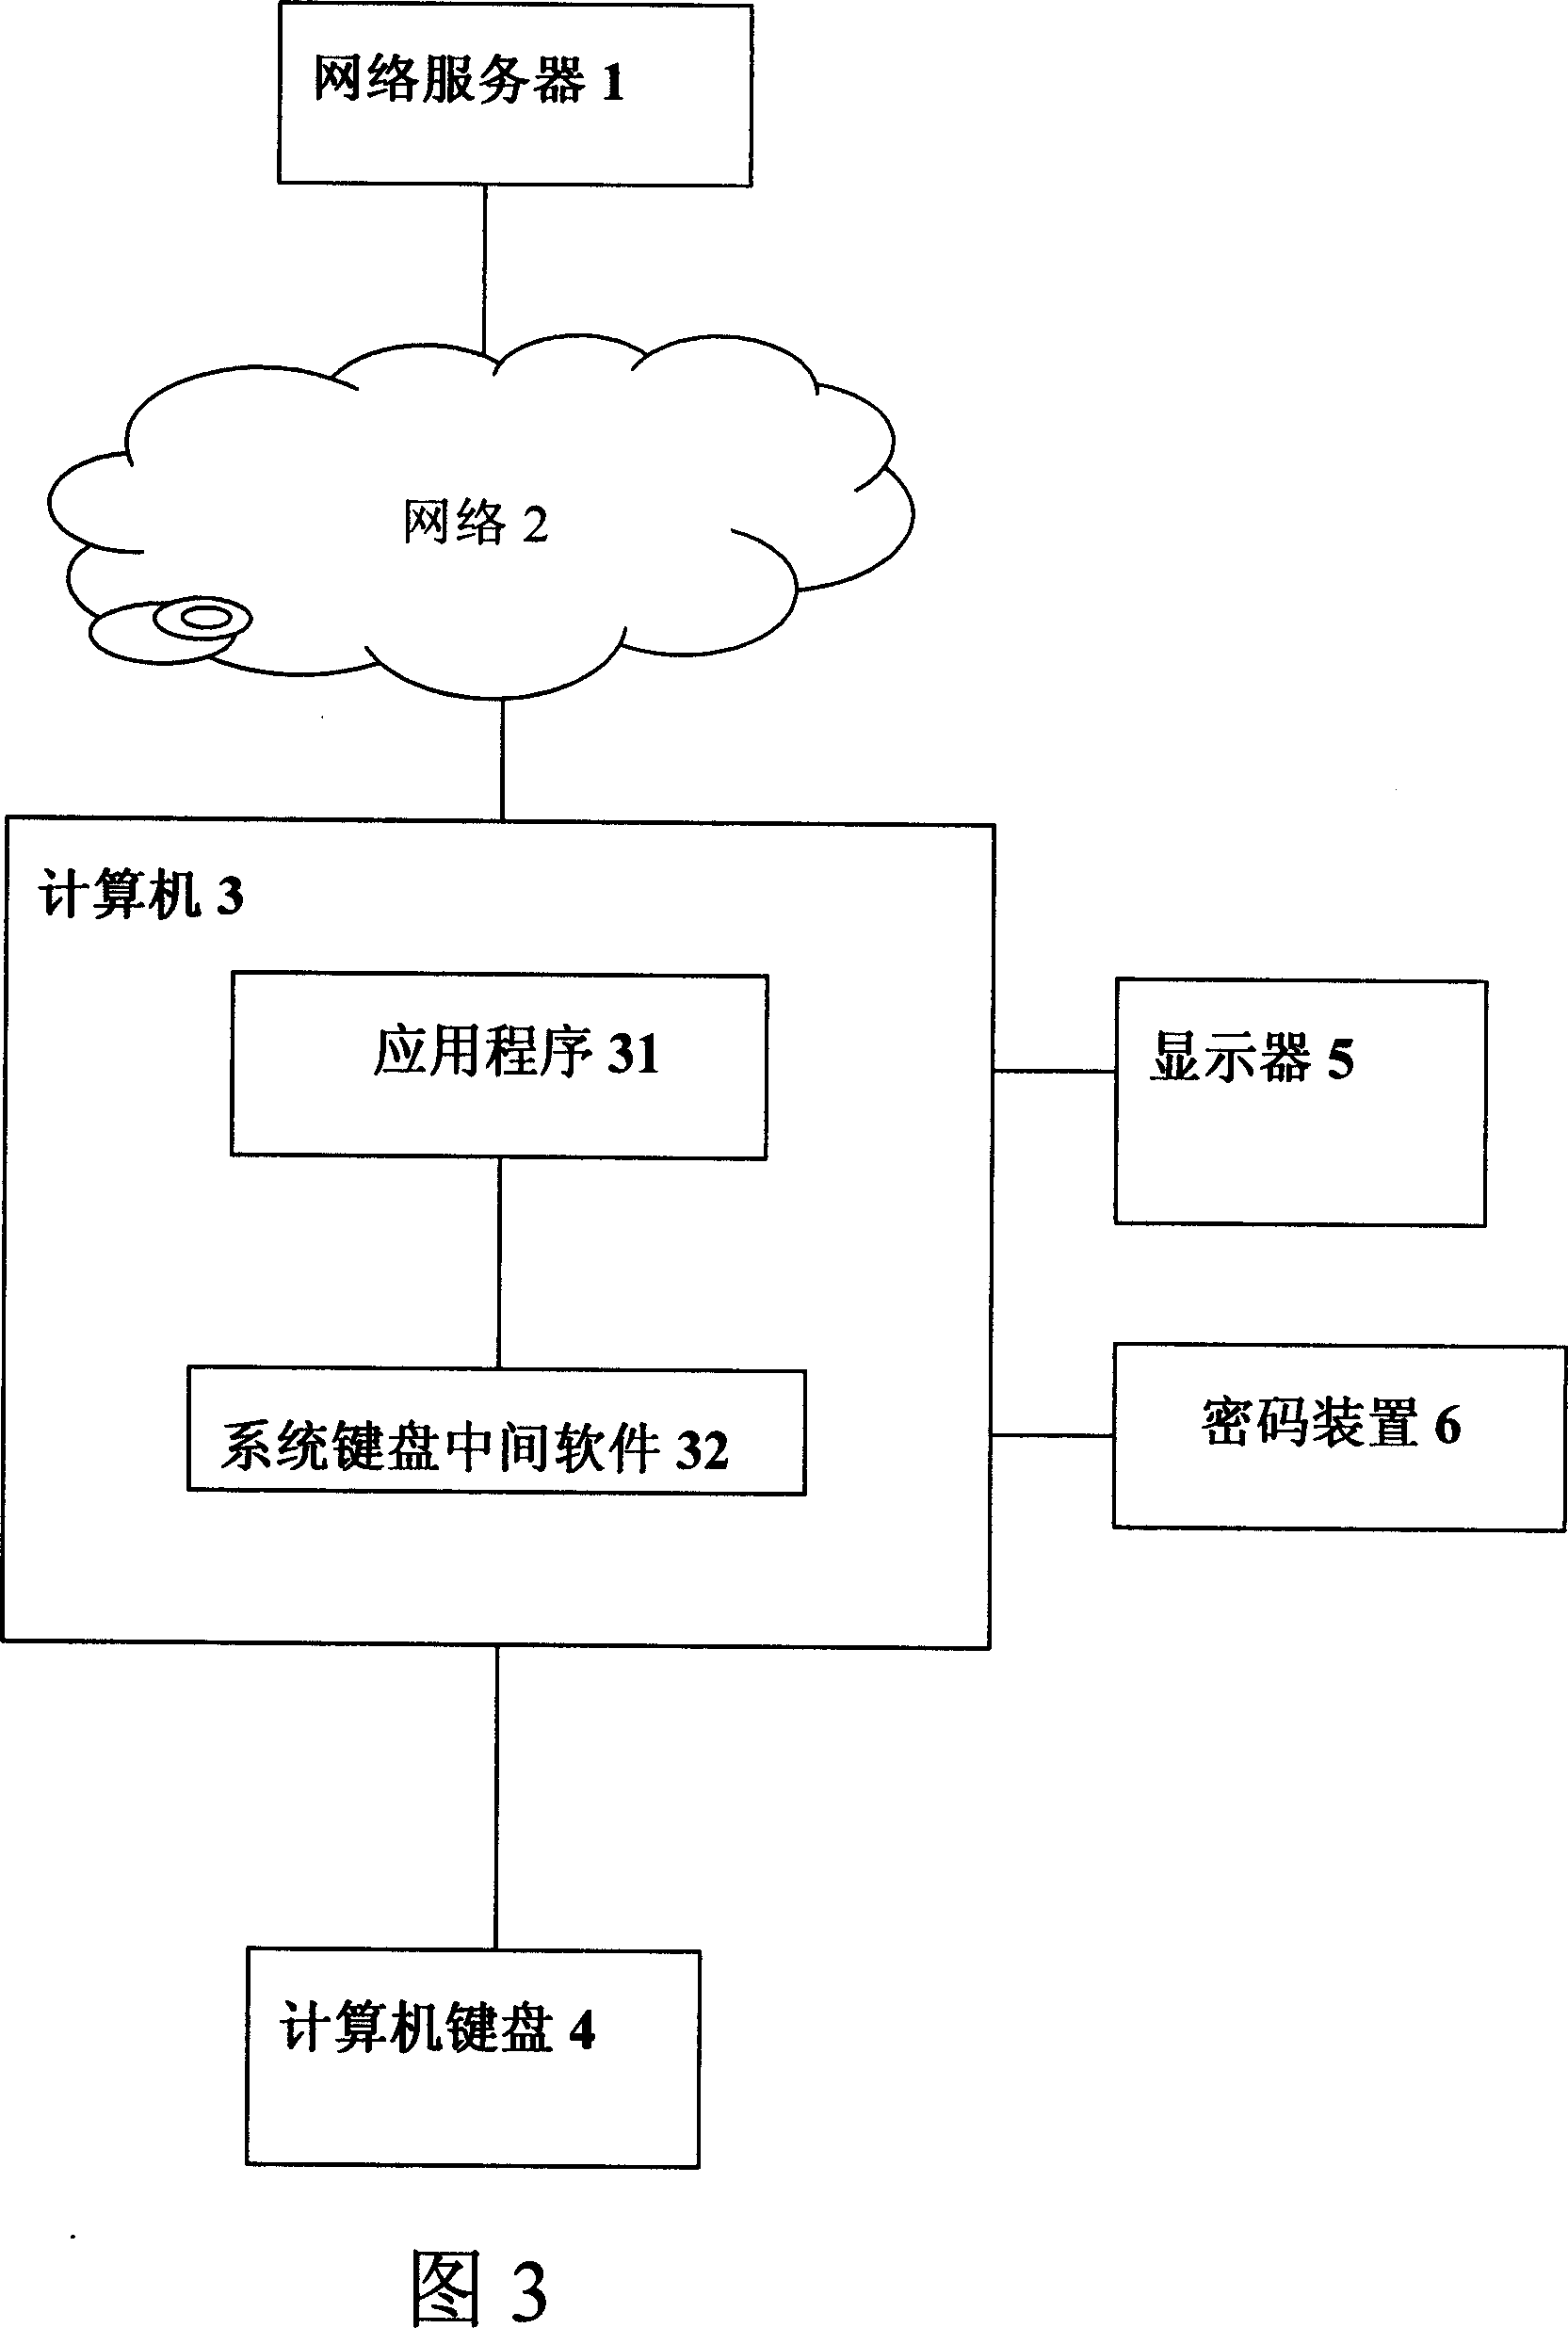 A device and method for secure use of network server service not depending on operating system security